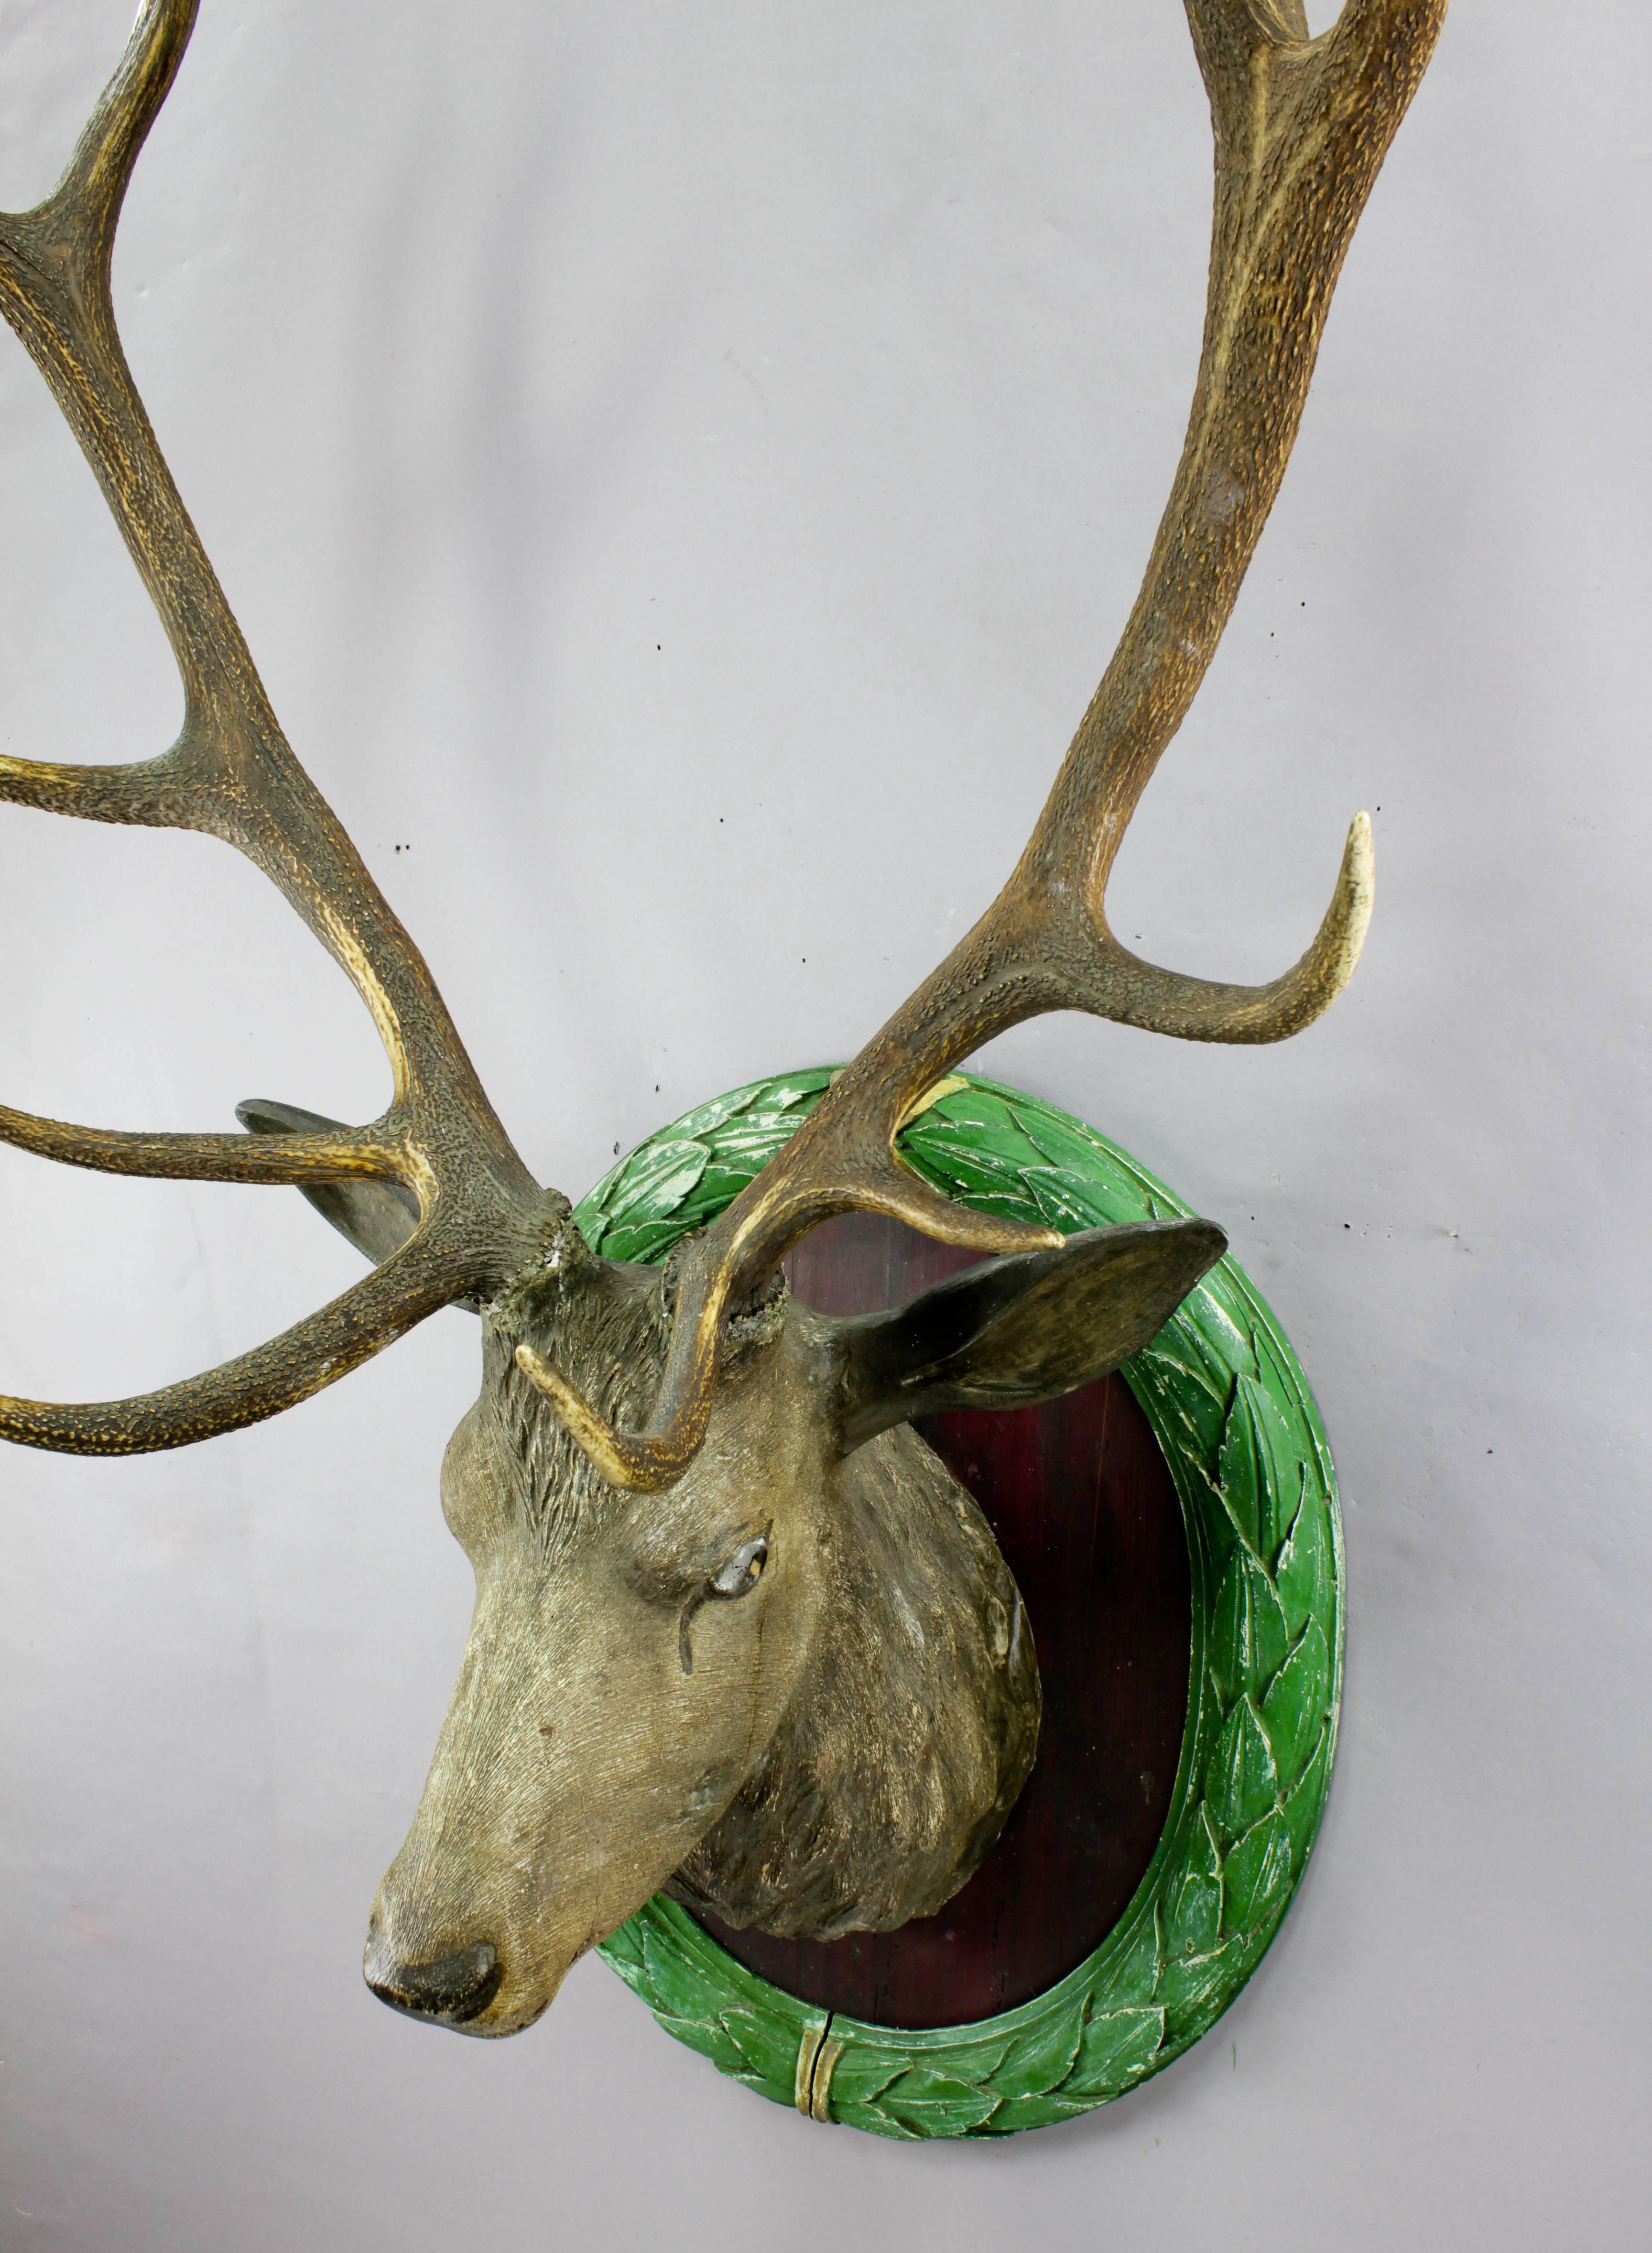 An almost live-size antique Black Forest hand-carved stag head with real antlers and glass eyes. Carved in naturalistic style, circa 1900.